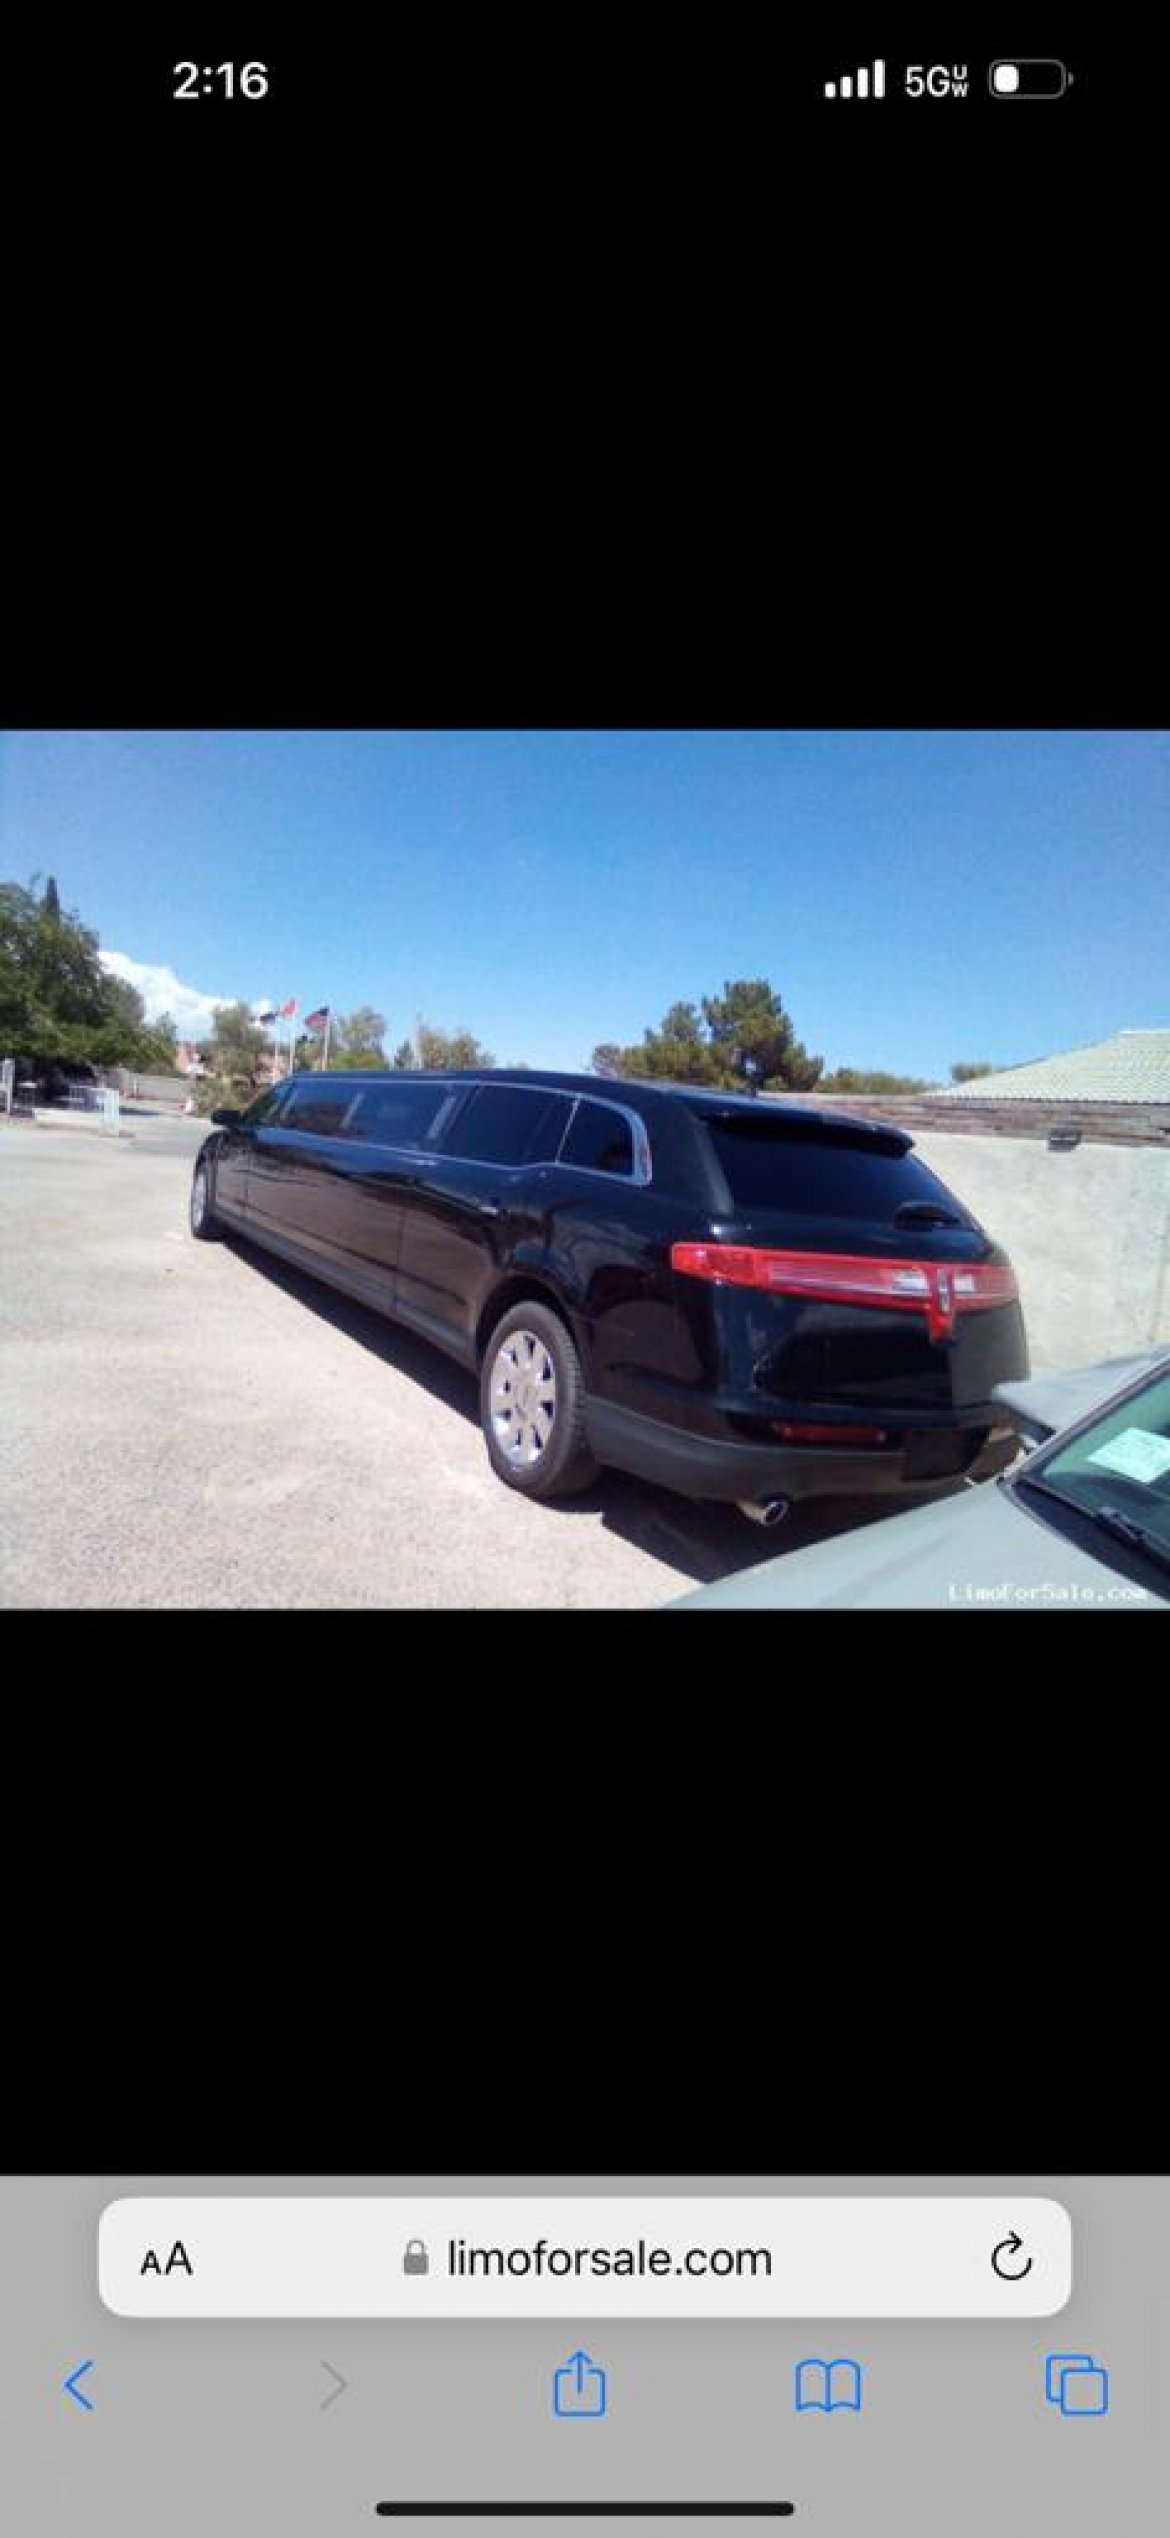 Limousine for sale: 2013 Lincoln Mkt by Crystal